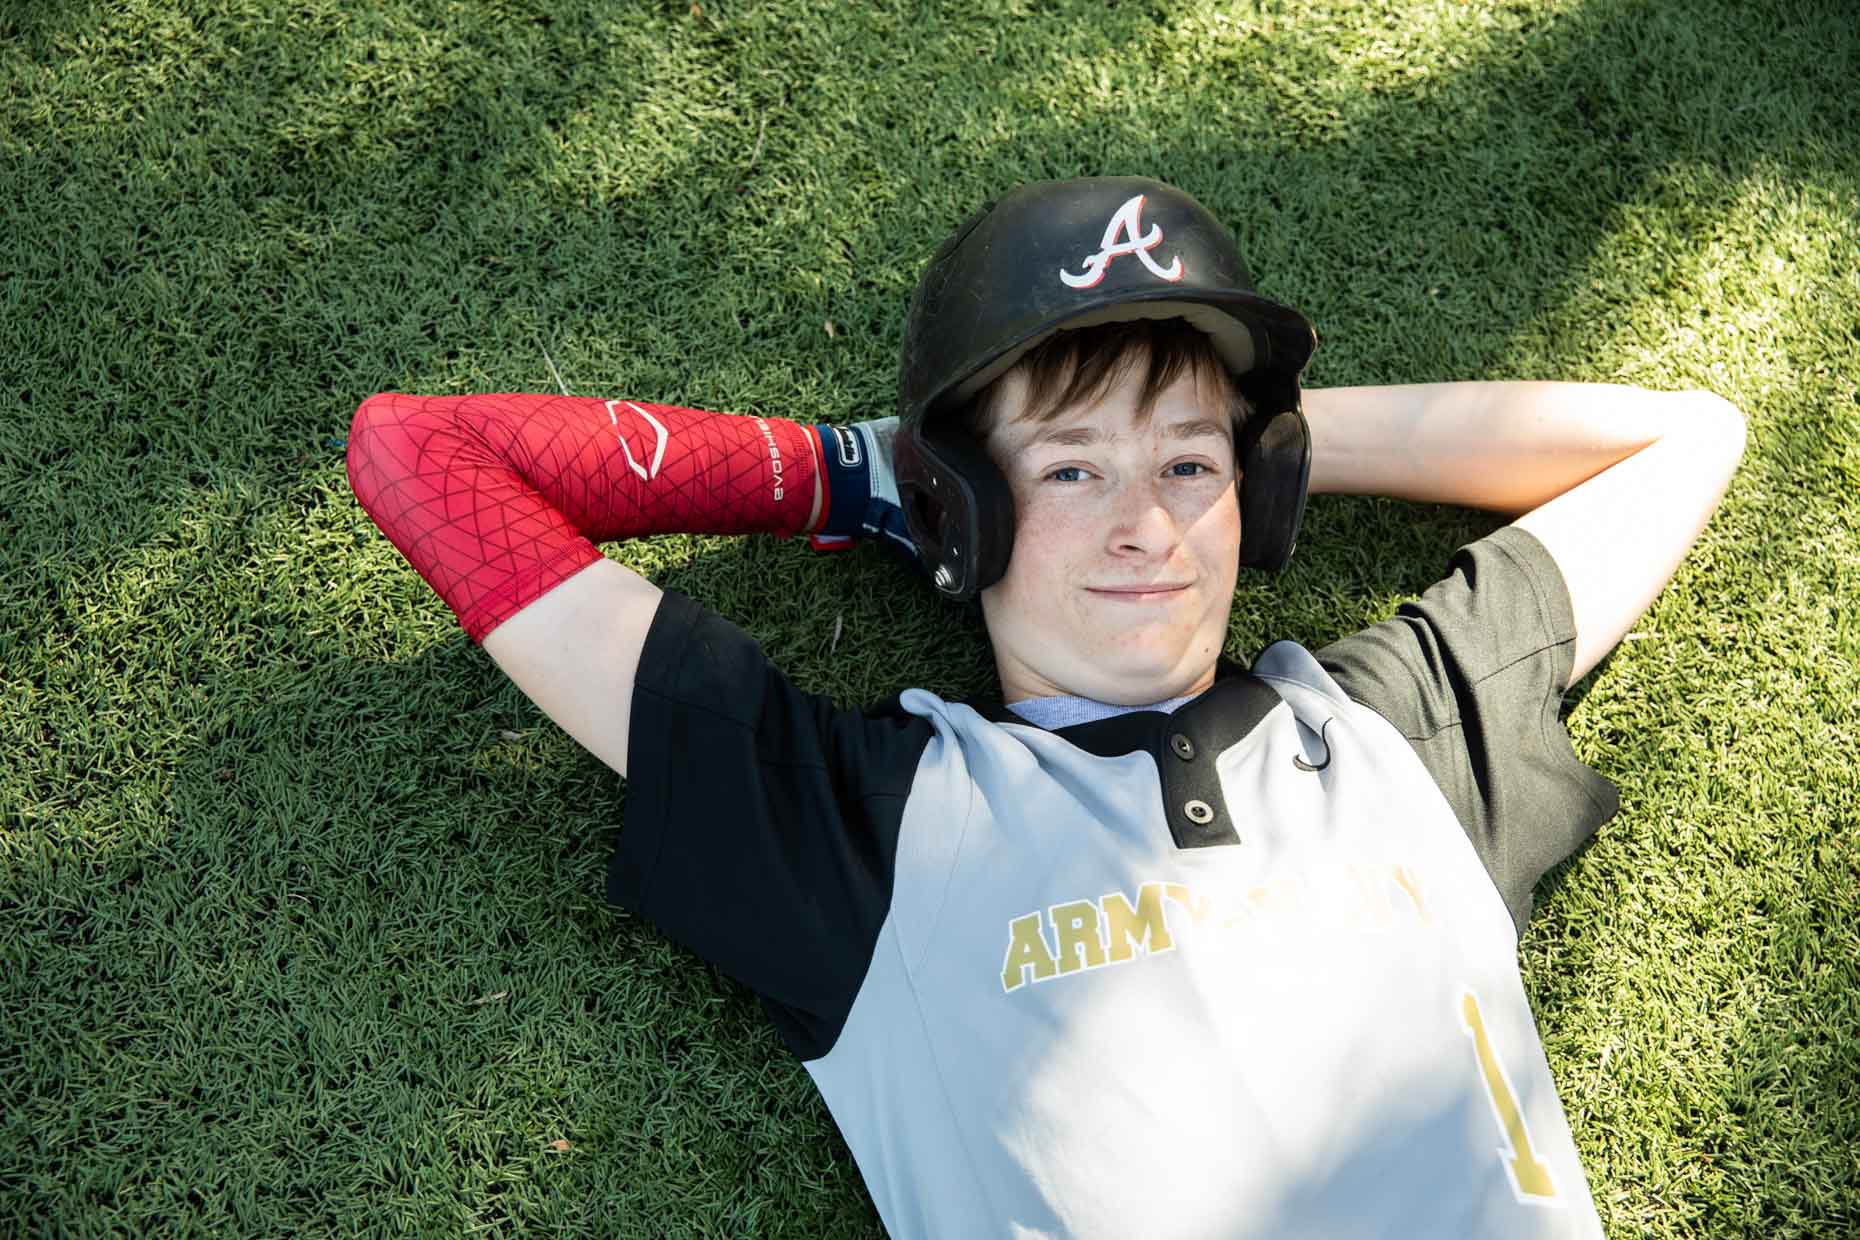 Young Baseball player laying on grass with batter helmet.